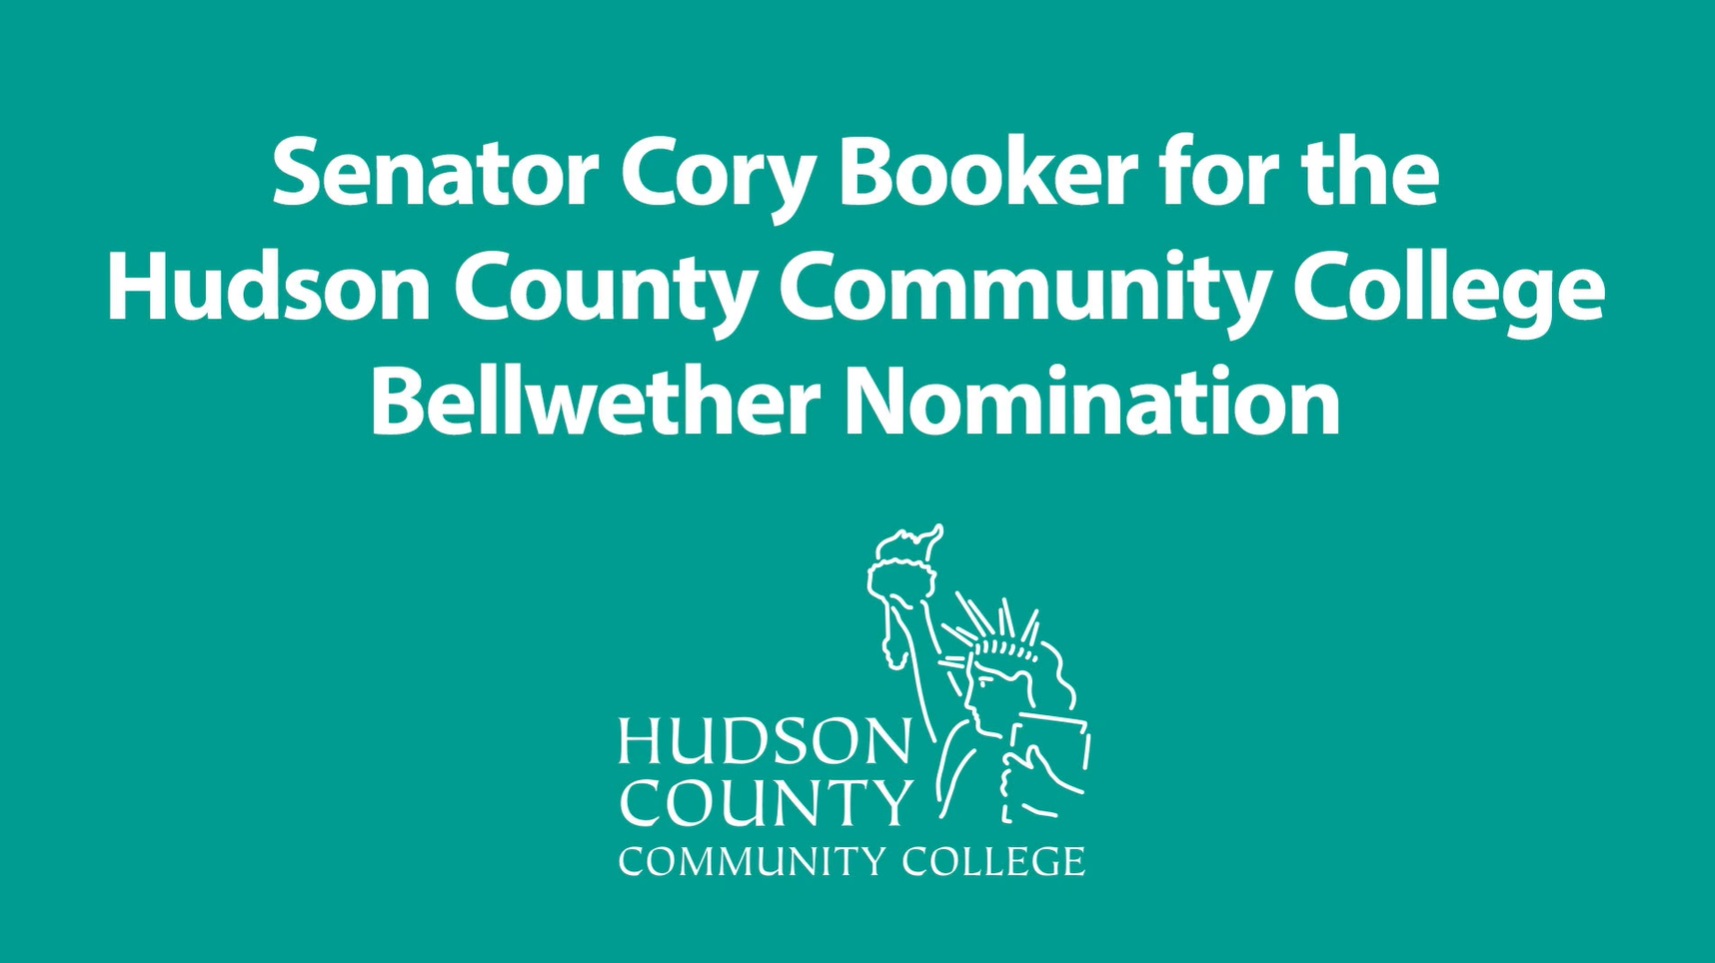 Senator Cory Booker for the Hudson County Community College Bellwether Nomination